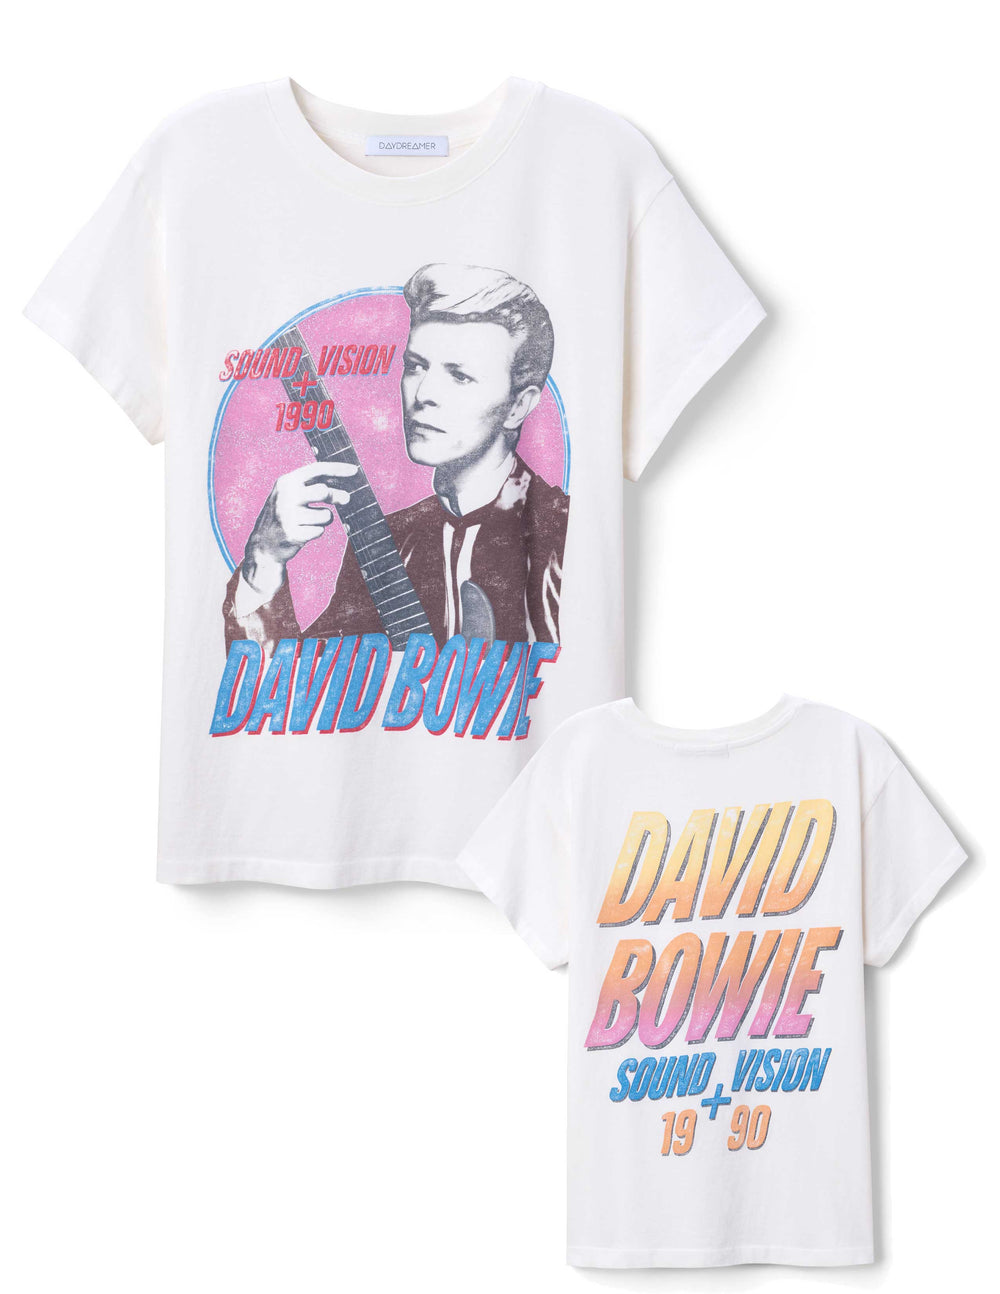 DAVID BOWIE SOUND & VISION TEE - Kingfisher Road - Online Boutique